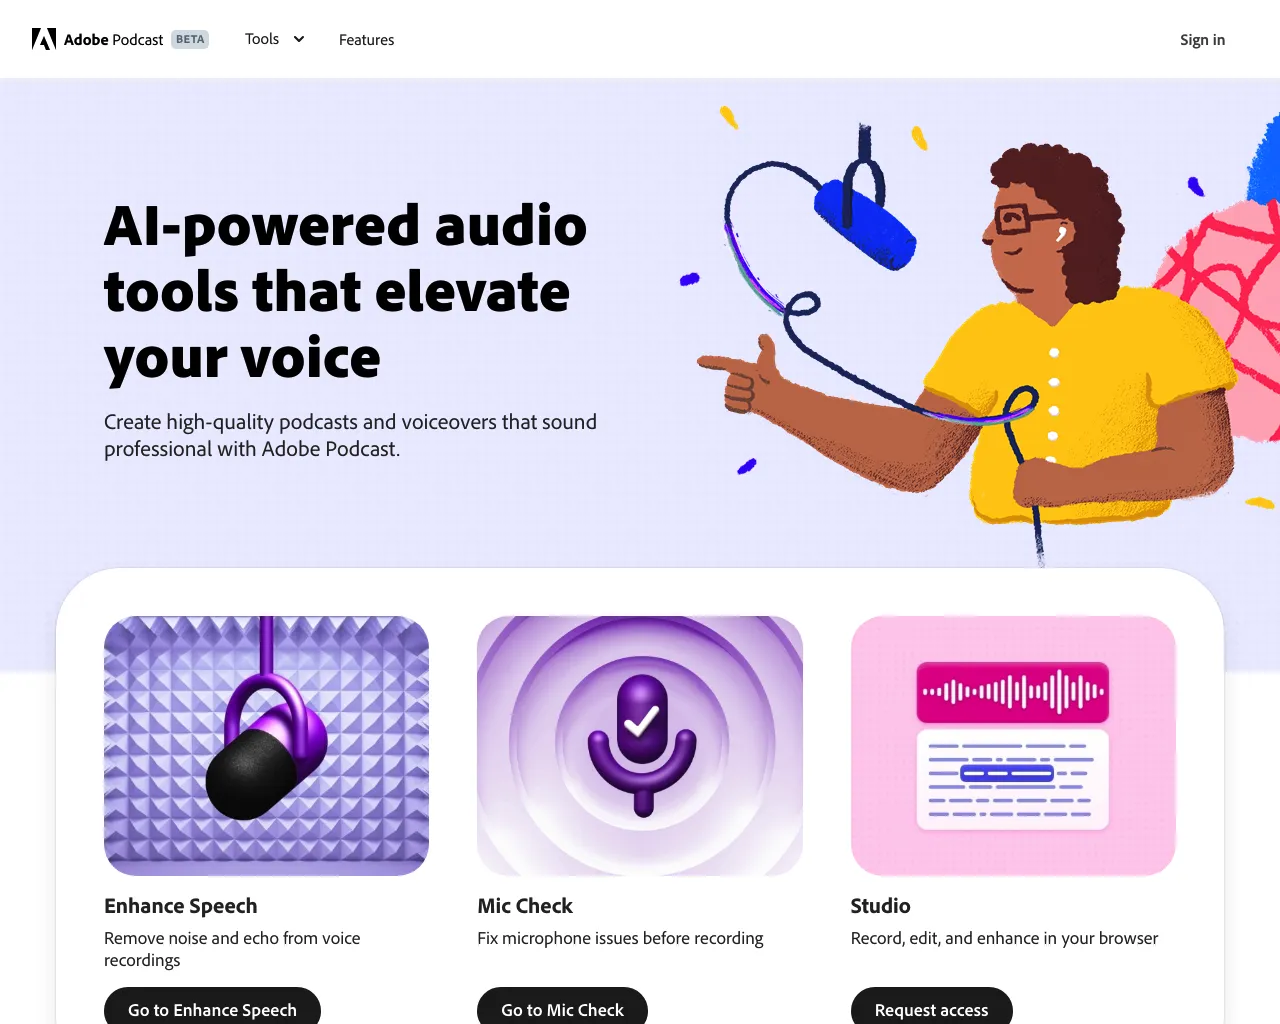 Adobe Podcast - AI Audio Recording and Editing, All on the Web